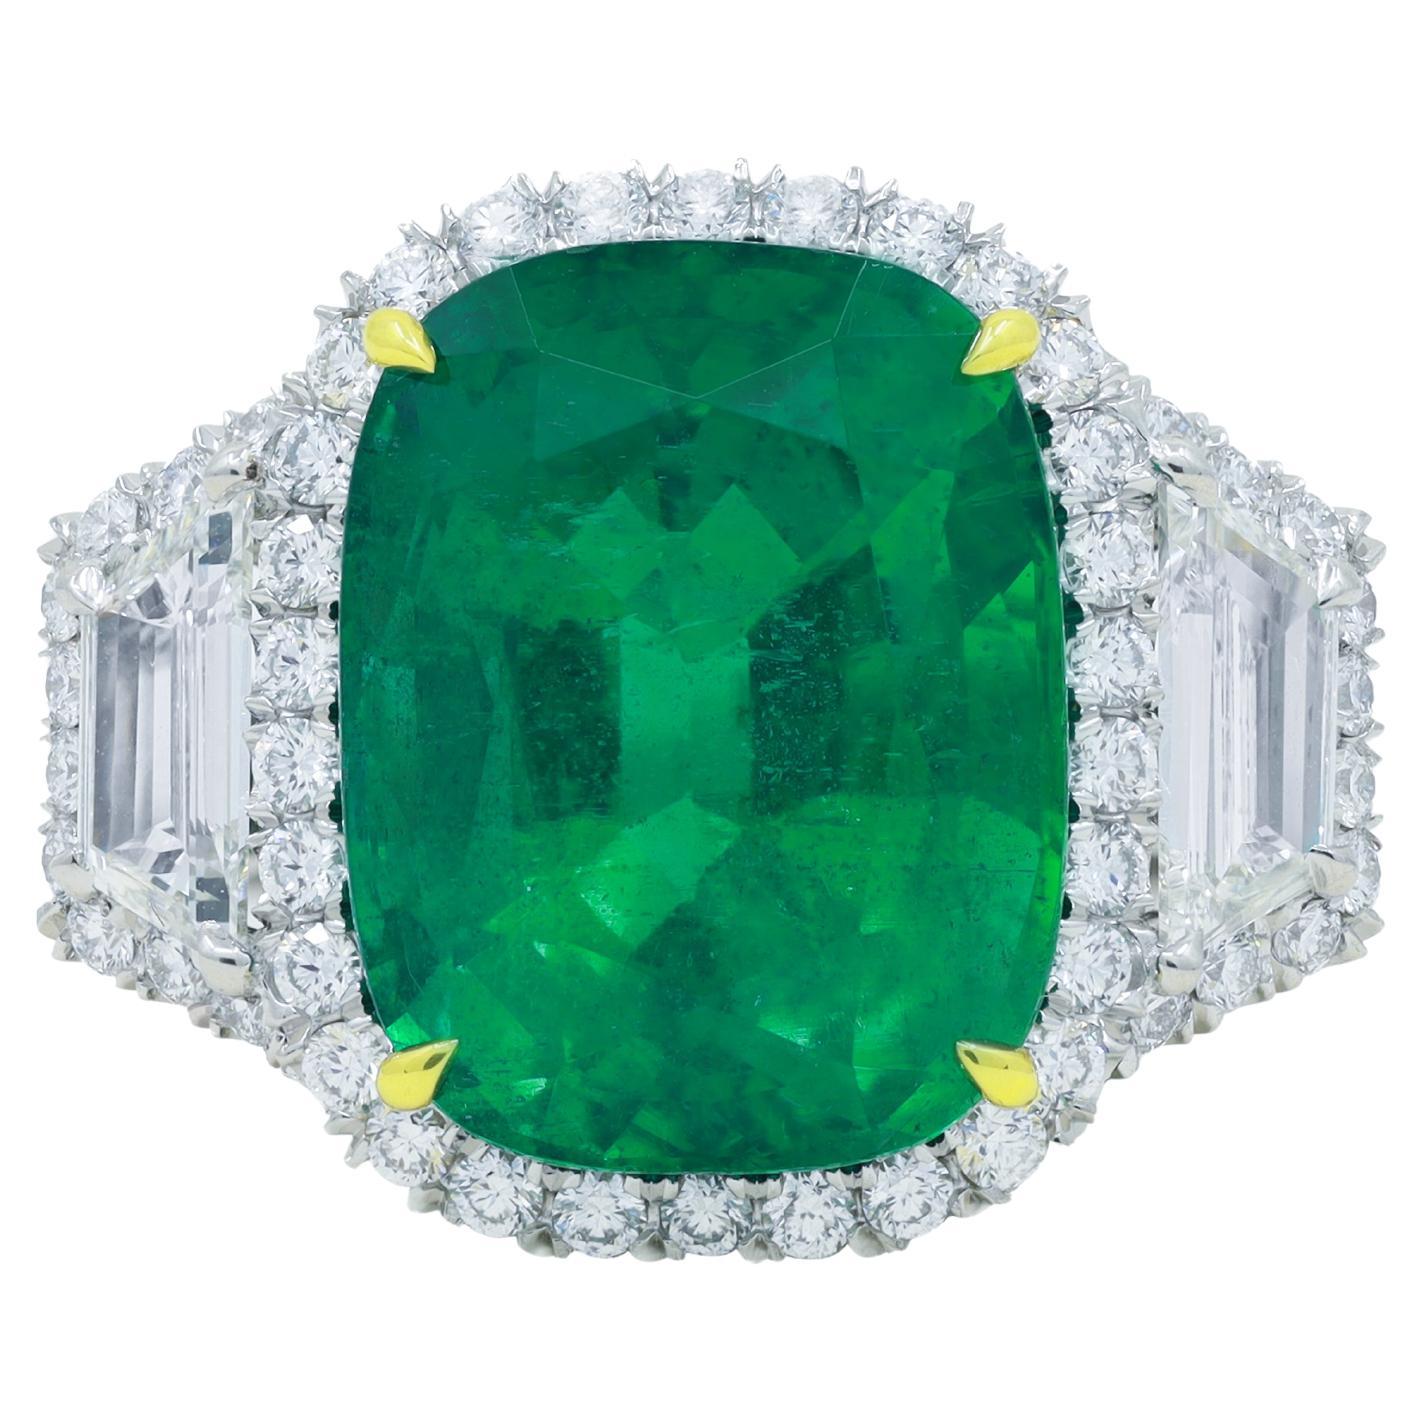 Diana M. Platinum and 18 kt yellow gold emerald and diamond ring featuring 11.22 For Sale